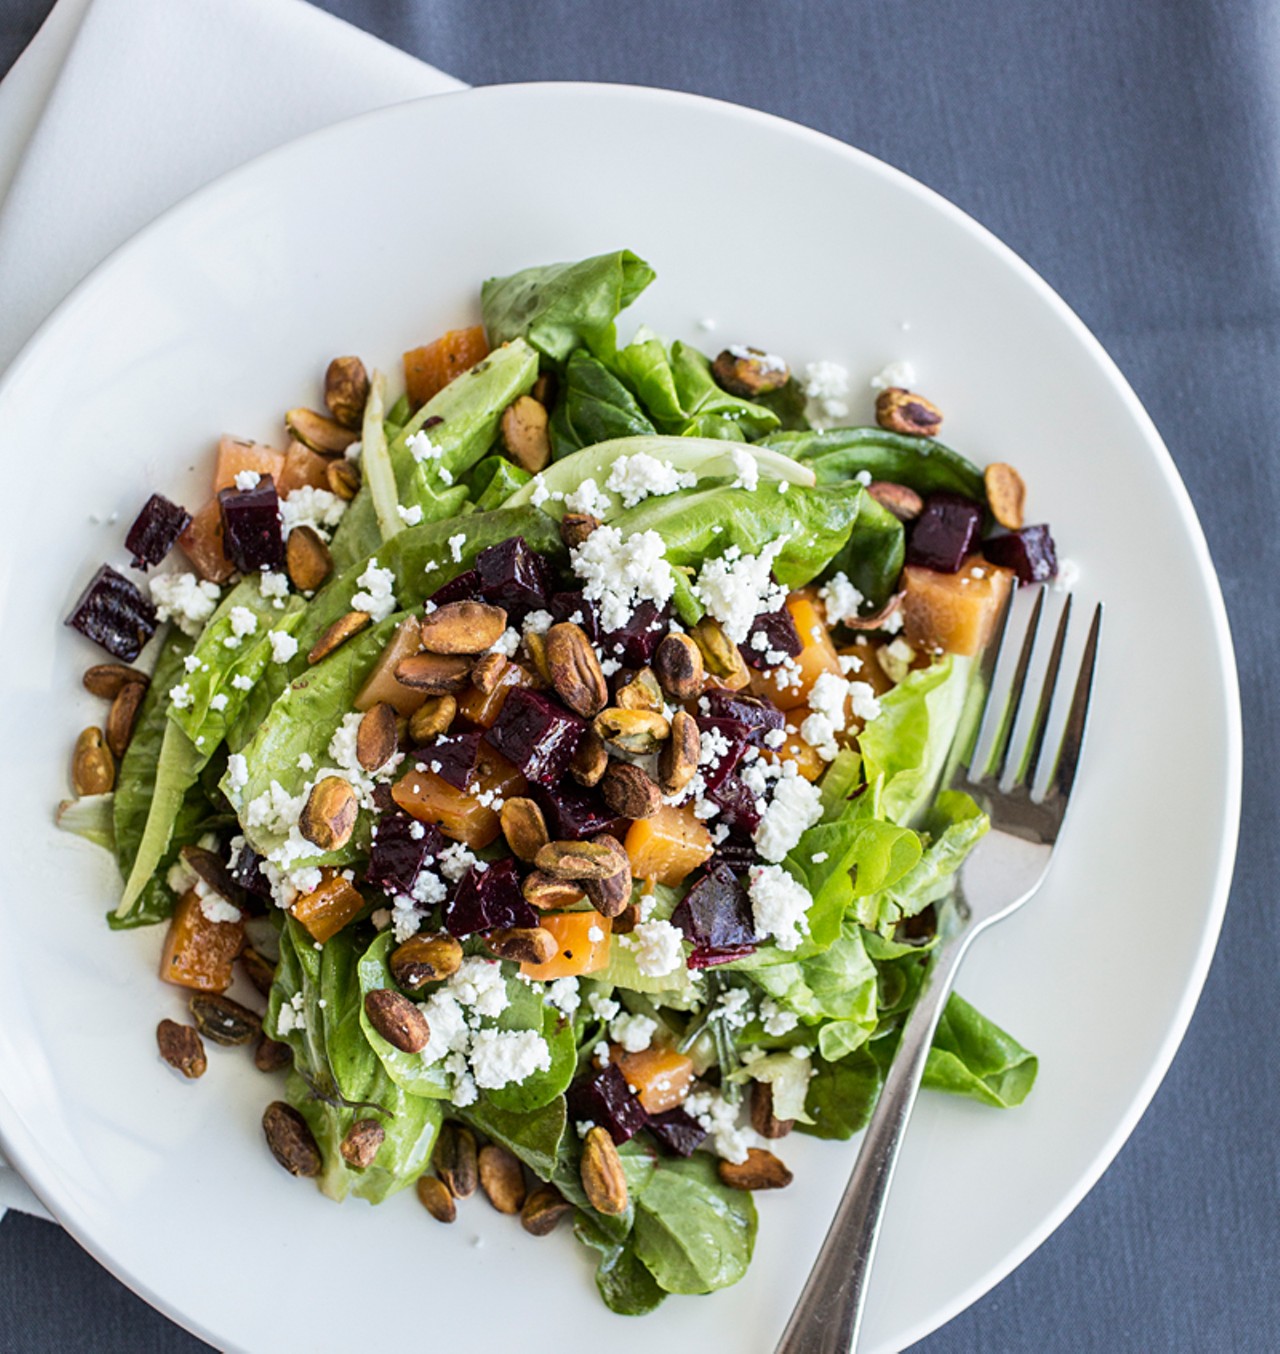 Roasted beet and local green salad is topped with blood orange vinaigrette, goat cheese and toasted pistachios.